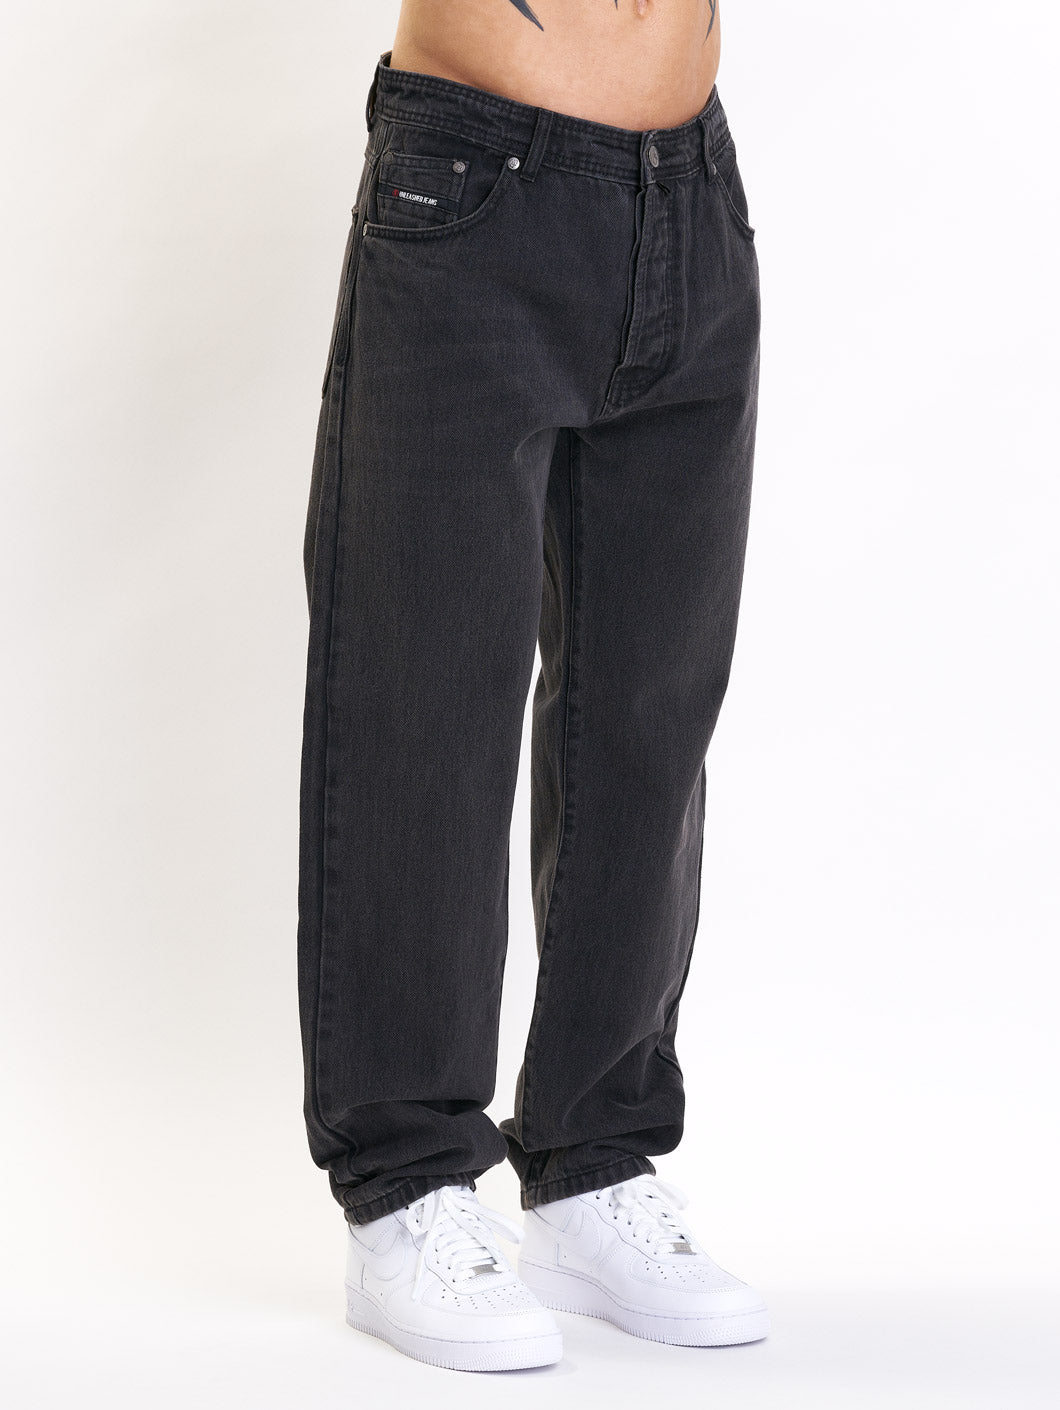 mox unleashed jeans - 4